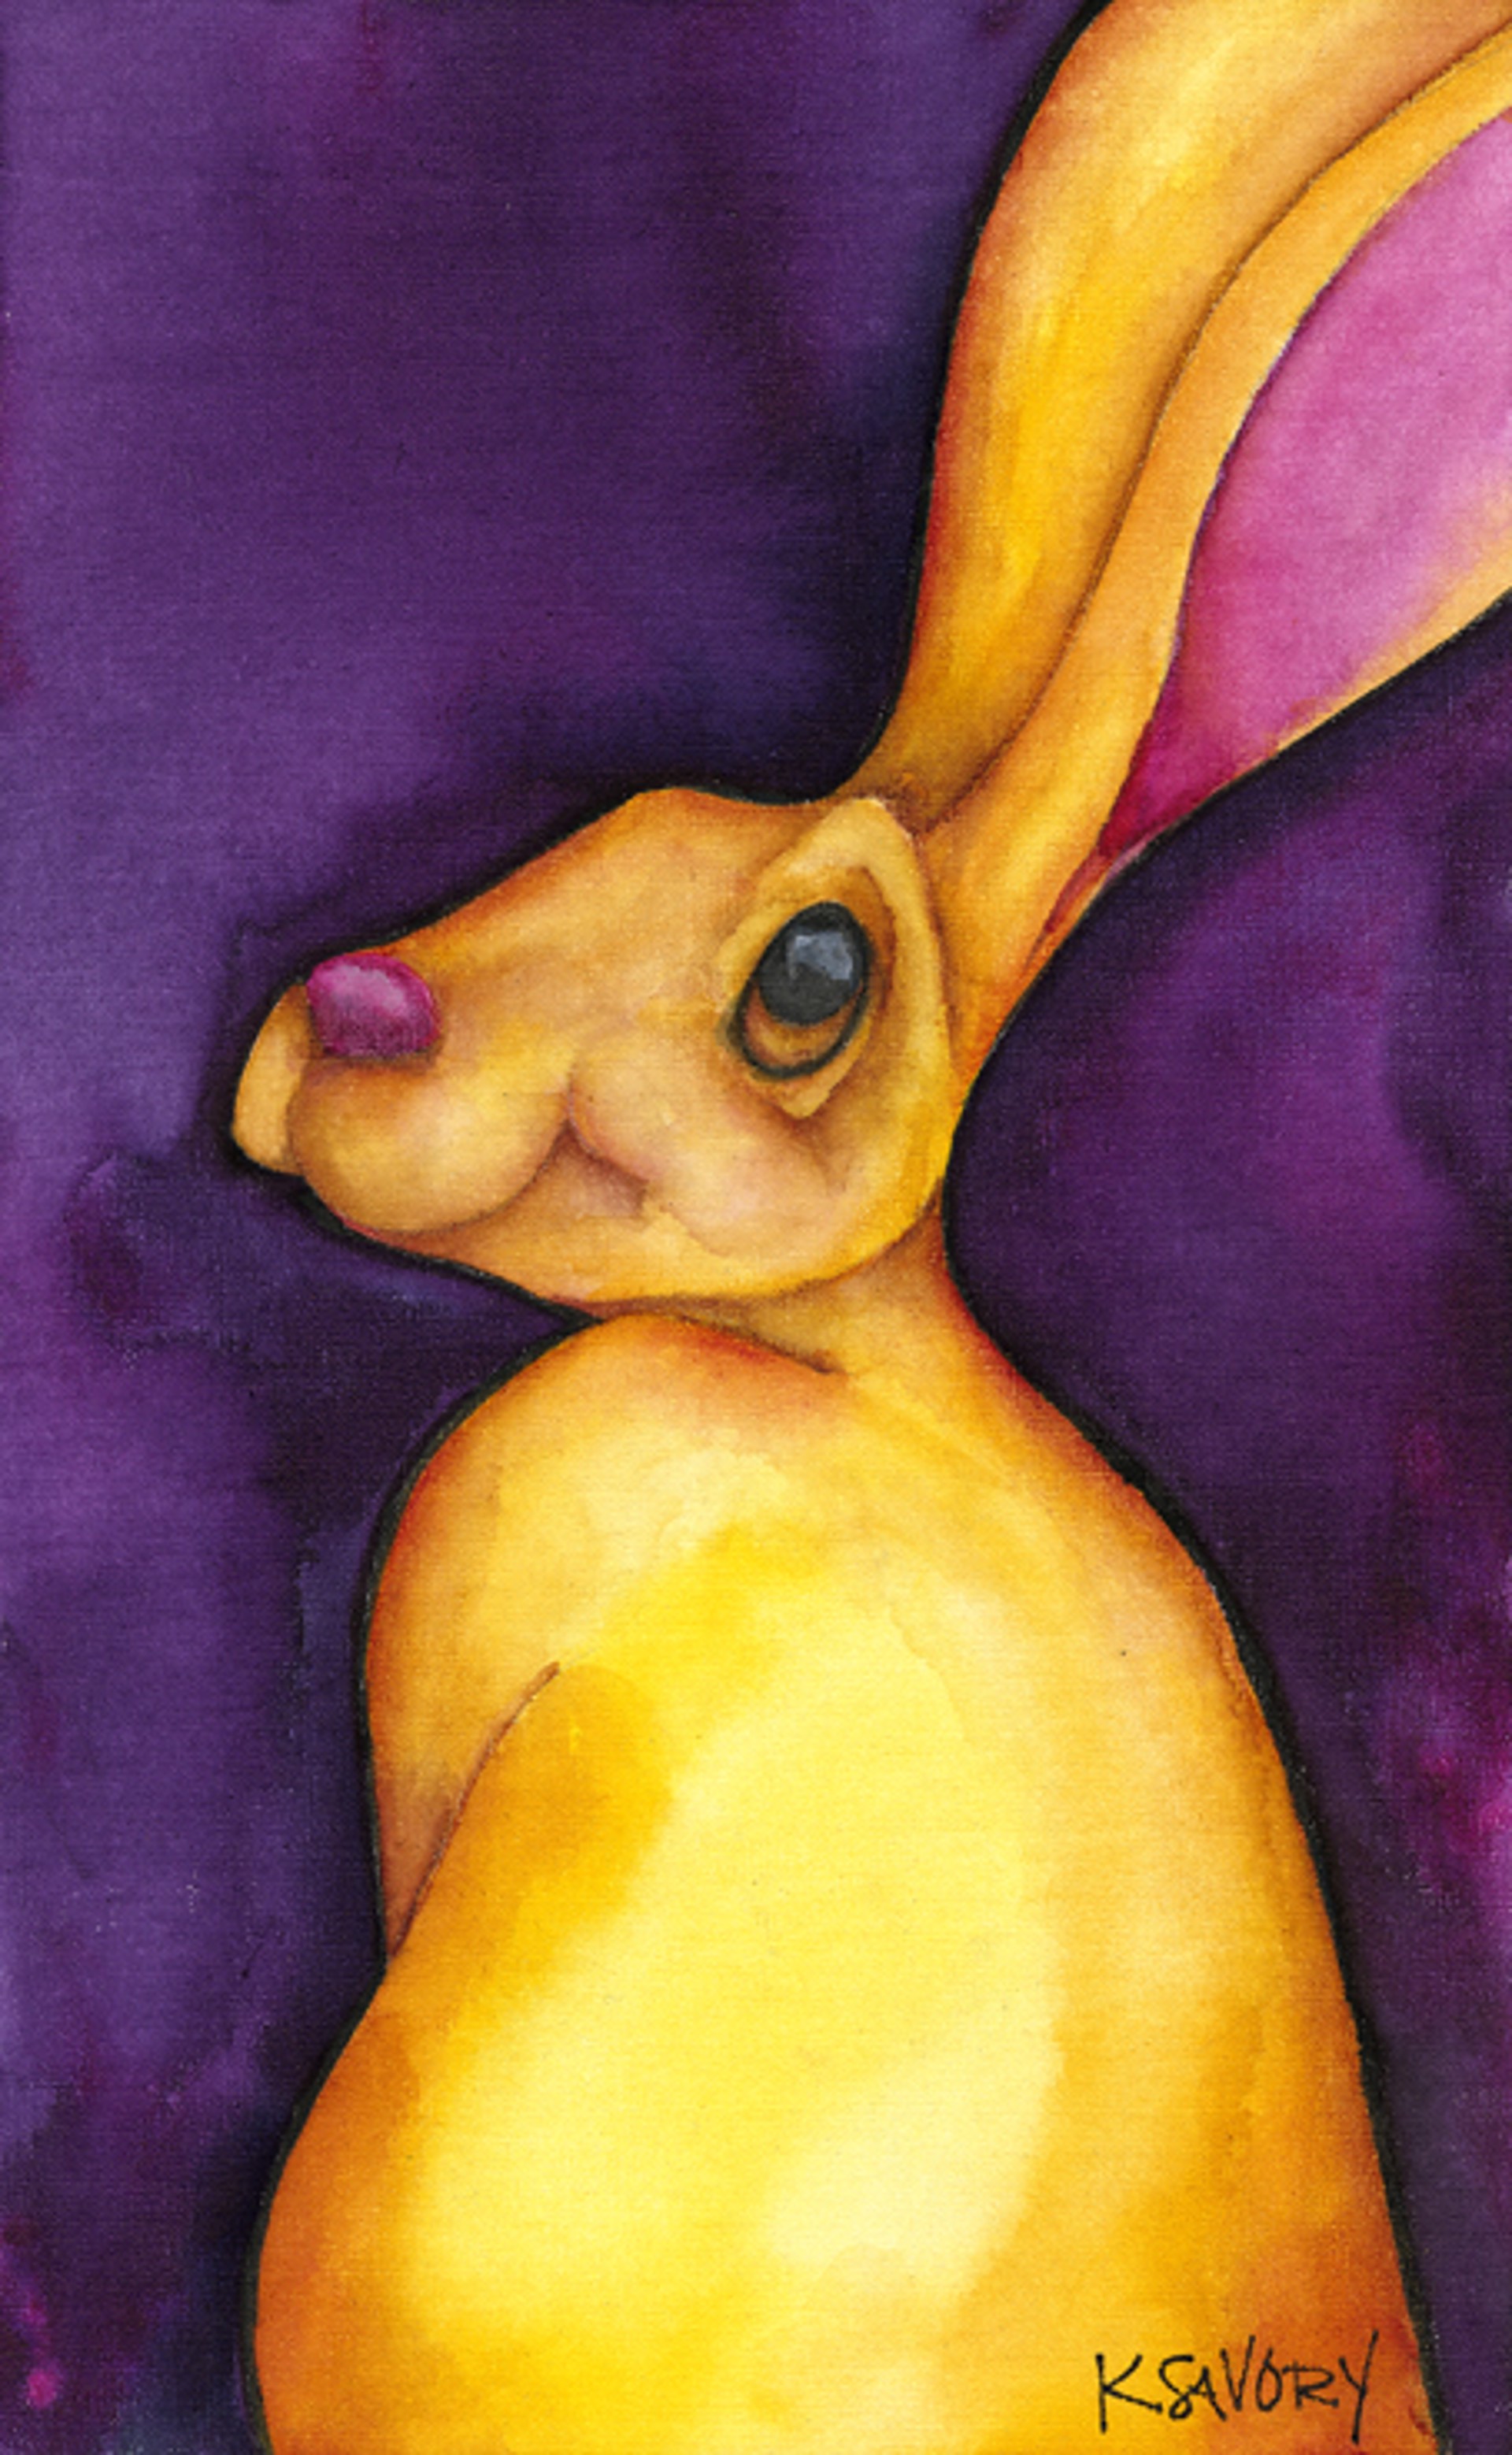 Neither Hare Nor Here by Karen Savory